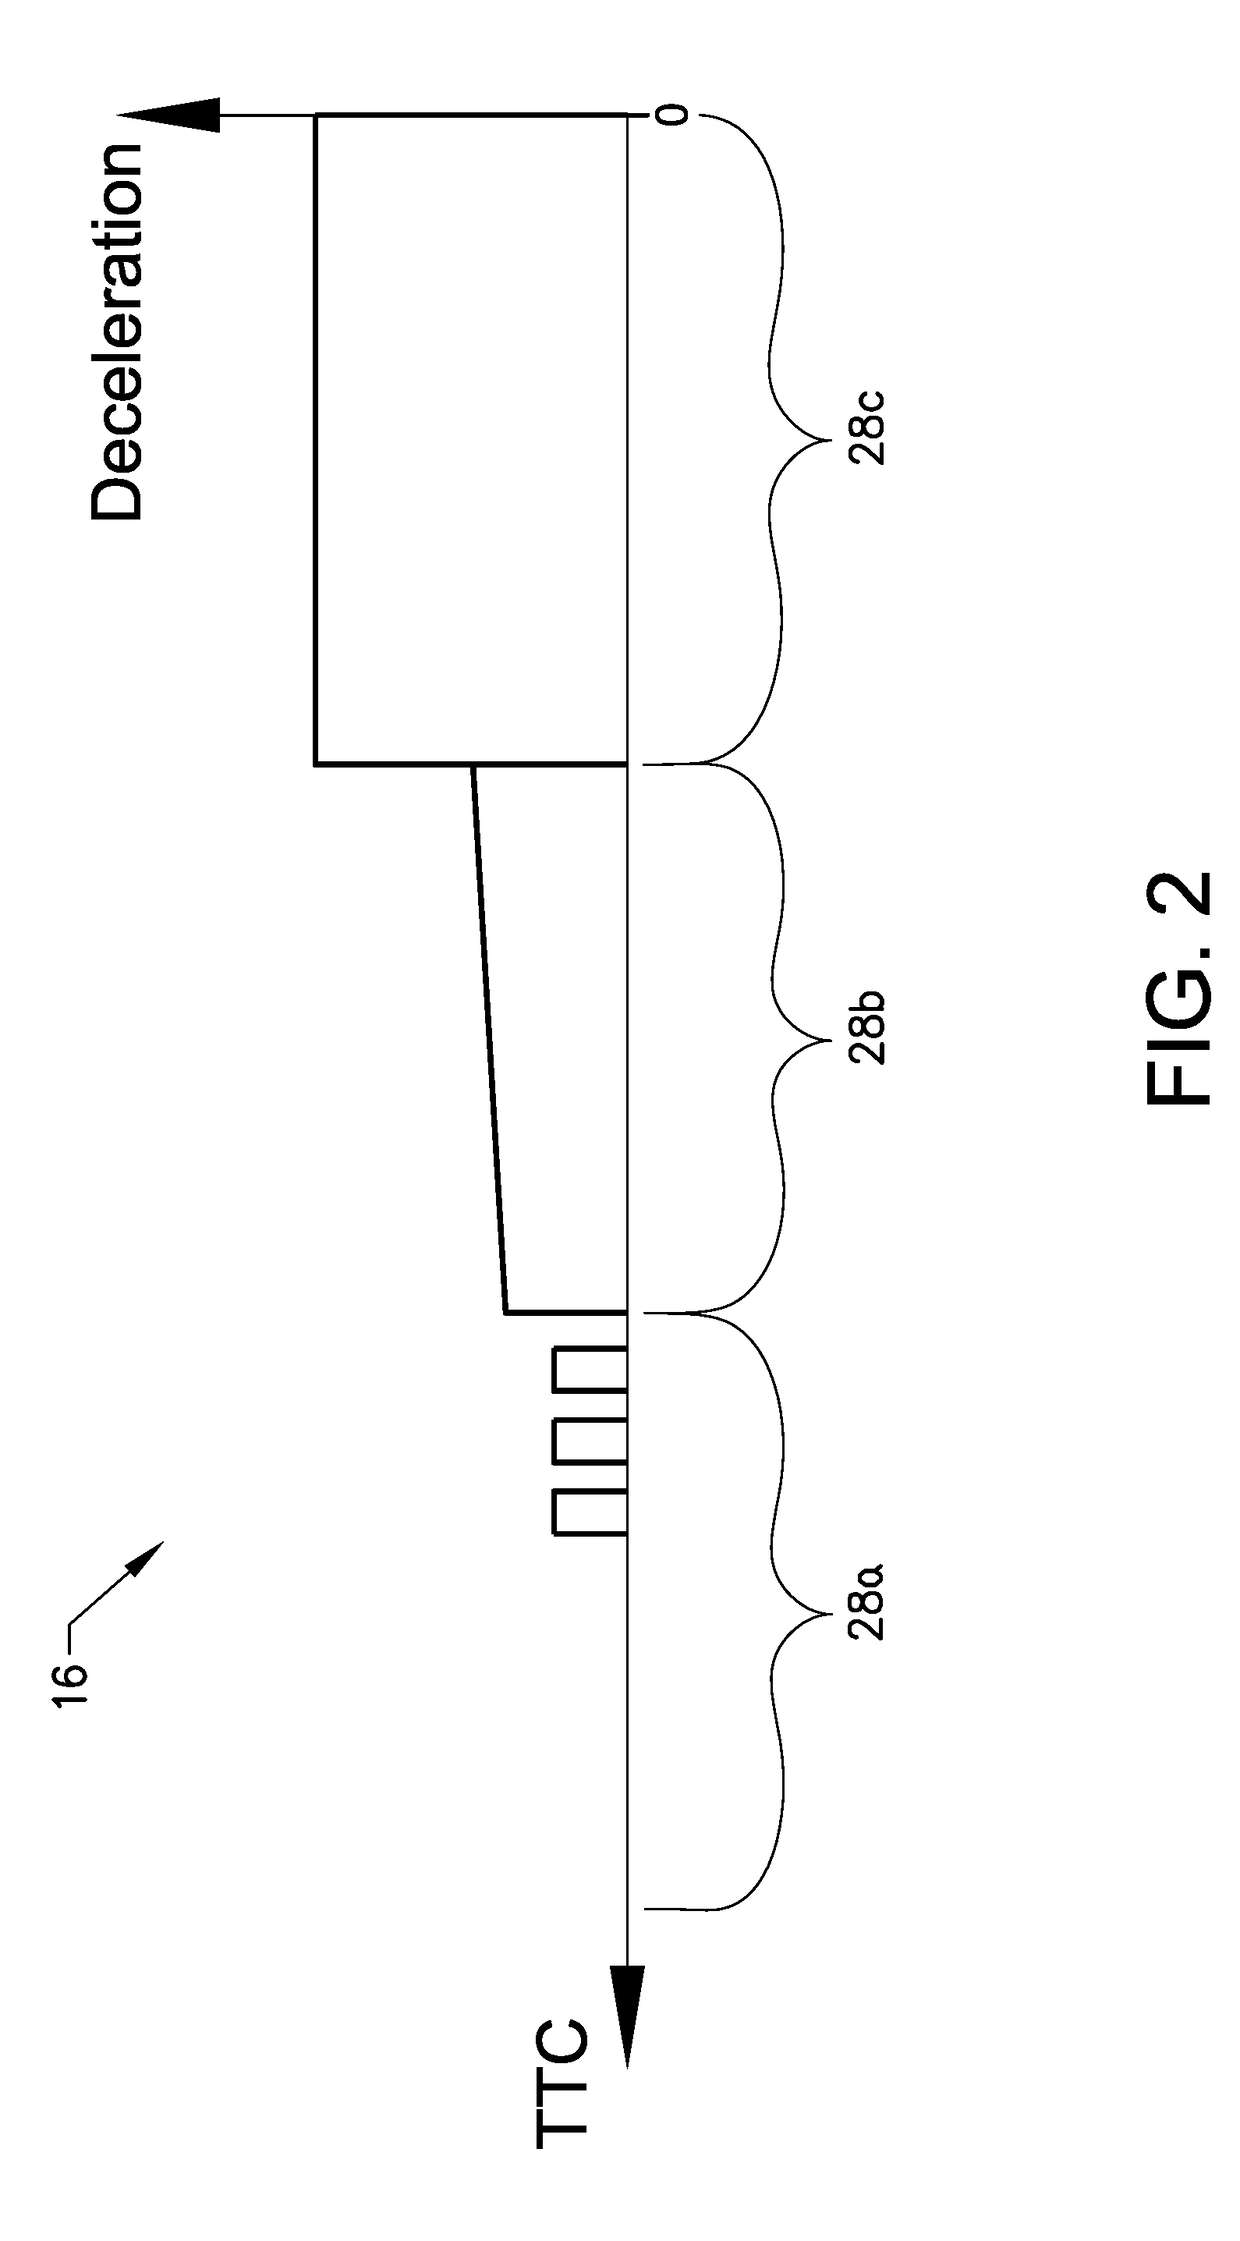 Method of controlling inter-vehicle gap(s) in a platoon